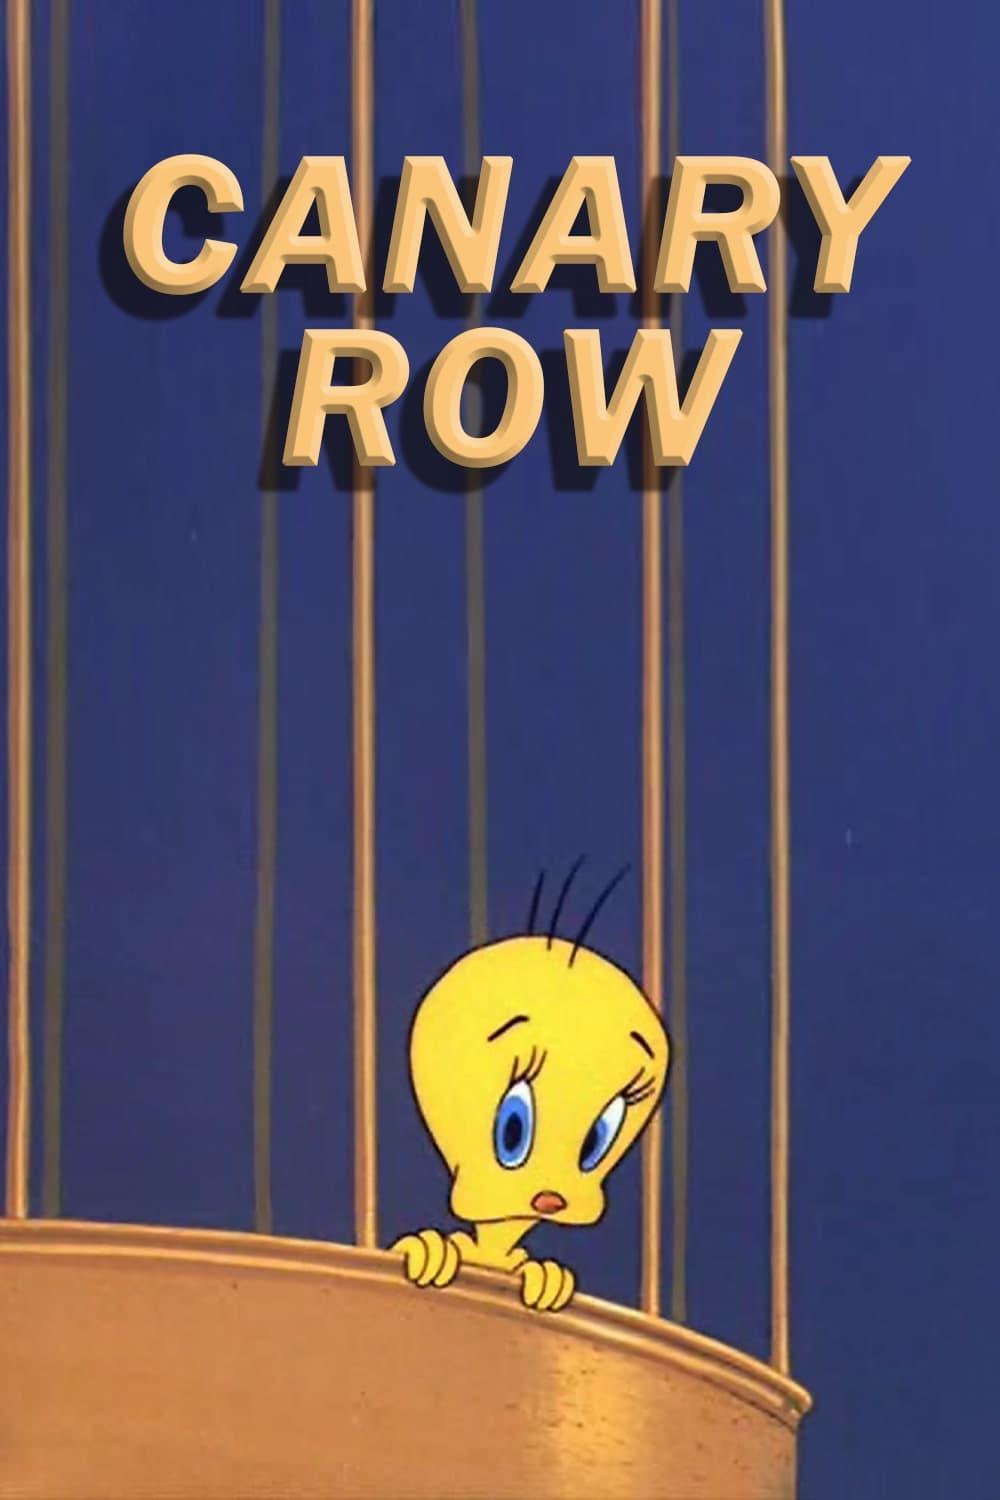 Canary Row poster